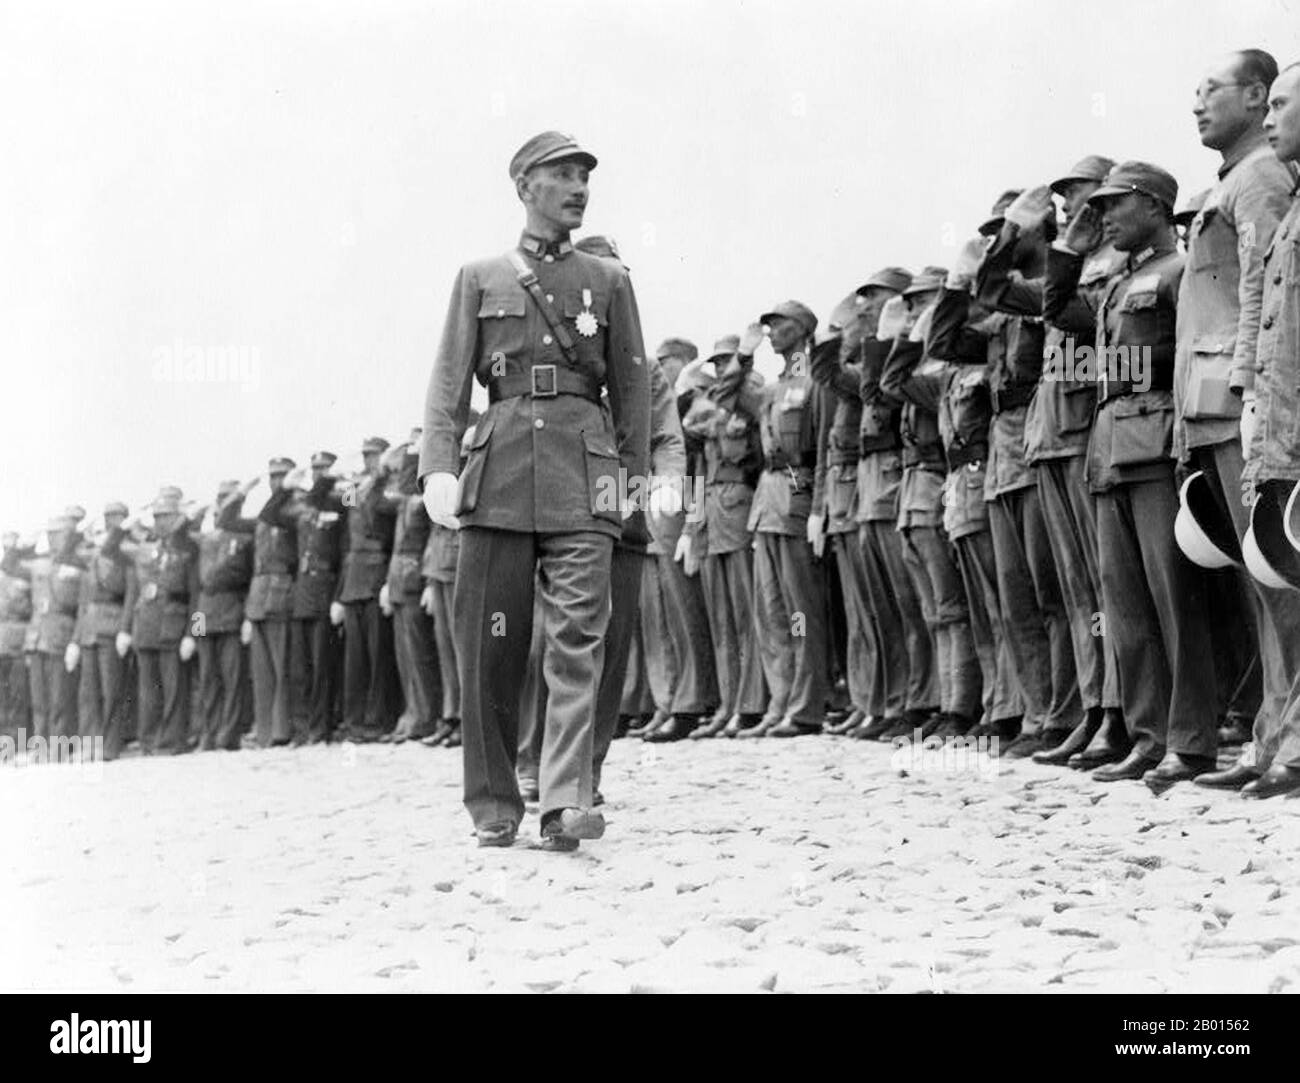 China: General Chiang Kai-shek (31 October 1887 – 5 April 1975) visiting officer training corps at Hankou, 1940.  Chiang Kai-shek was a political and military leader of 20th century China. He is known as Jiǎng Jièshí or Jiǎng Zhōngzhèng in Mandarin. Chiang was an influential member of the Nationalist Party, the Kuomintang (KMT), and was a close ally of Sun Yat-sen. He became the Commandant of the Kuomintang's Whampoa Military Academy, and took Sun's place as leader of the KMT when Sun died in 1925. In 1926, Chiang led the Northern Expedition to unify the country. Stock Photo